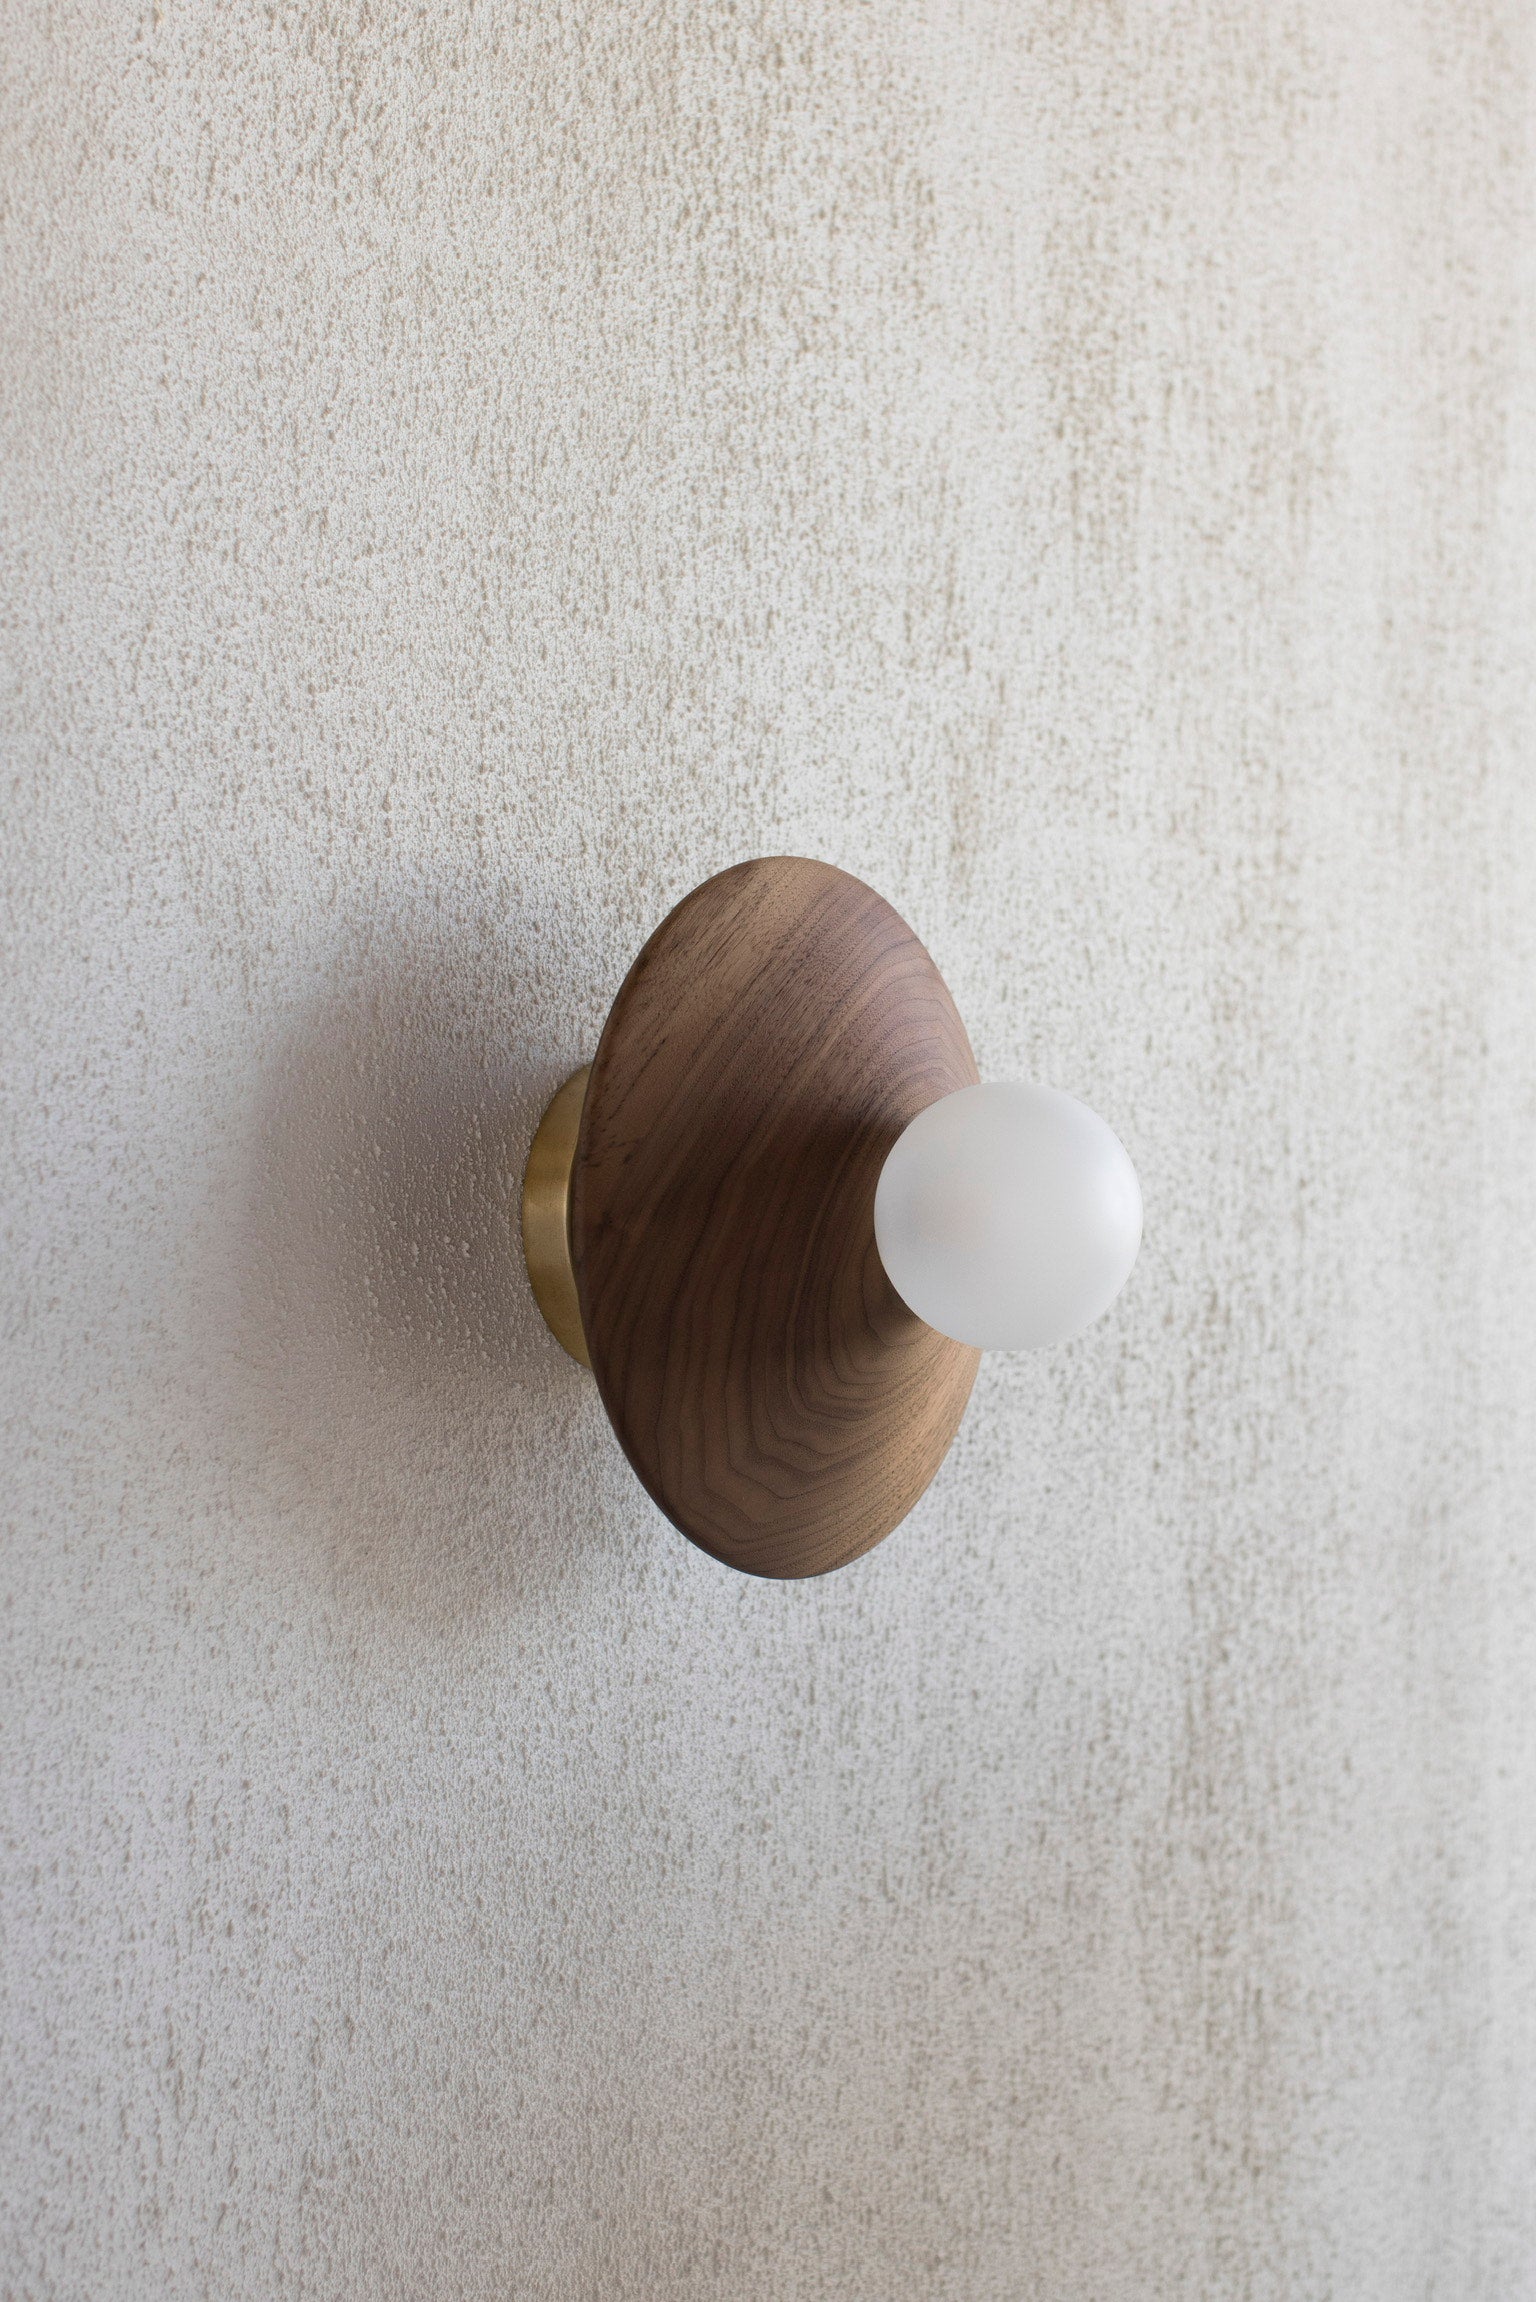 Customised Disc wall light with deep rose & switch for the The Ocean Club.